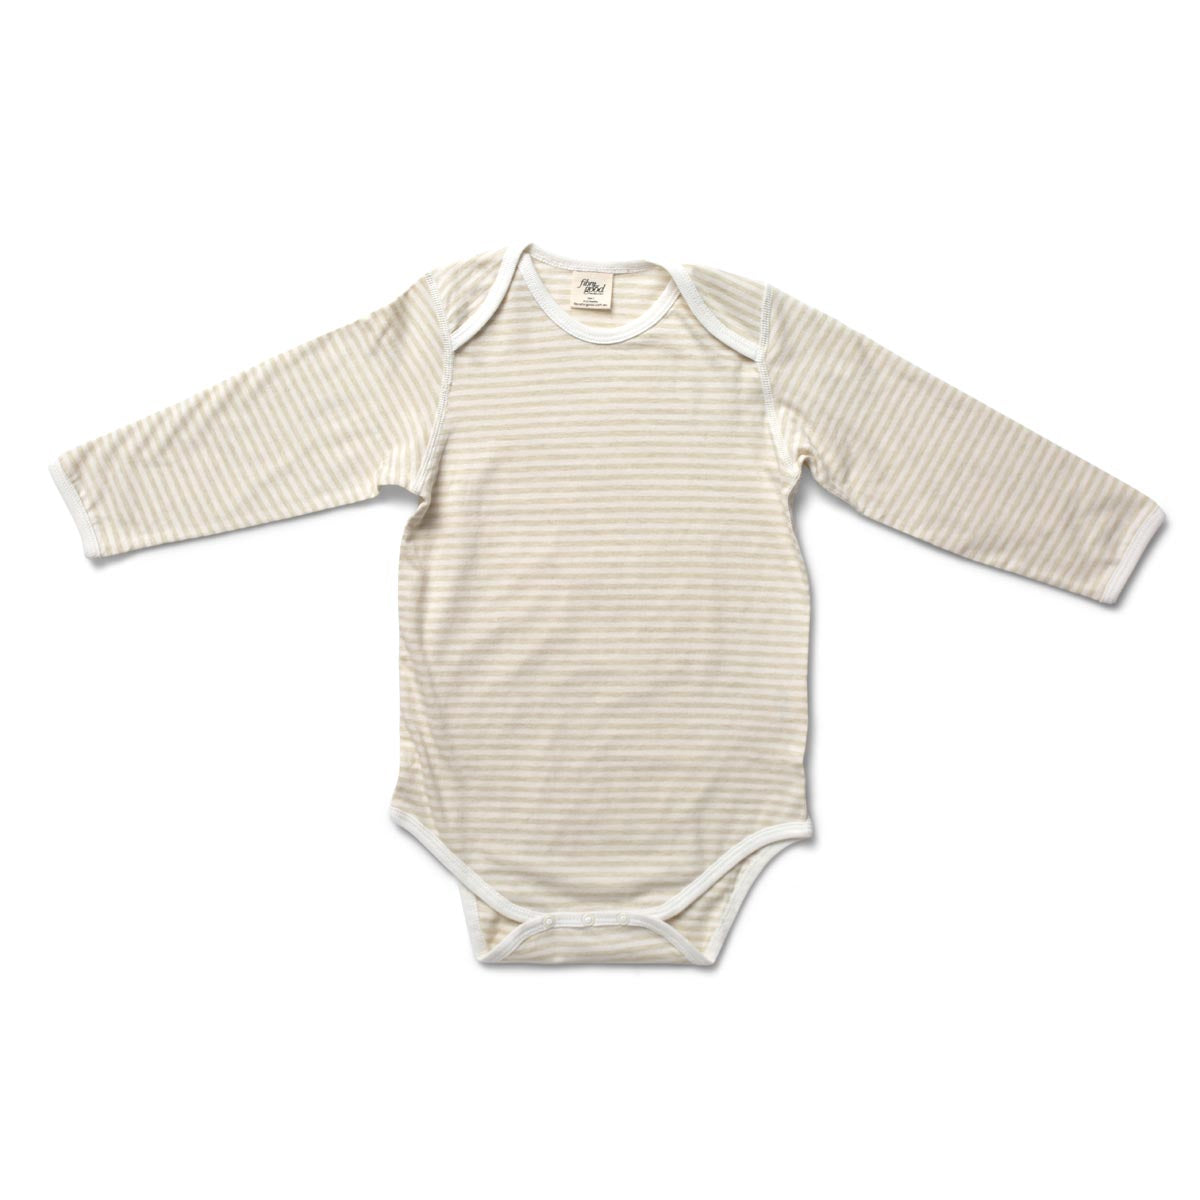 Baby Long Sleeve Body Suit, Sage Nat Stripes